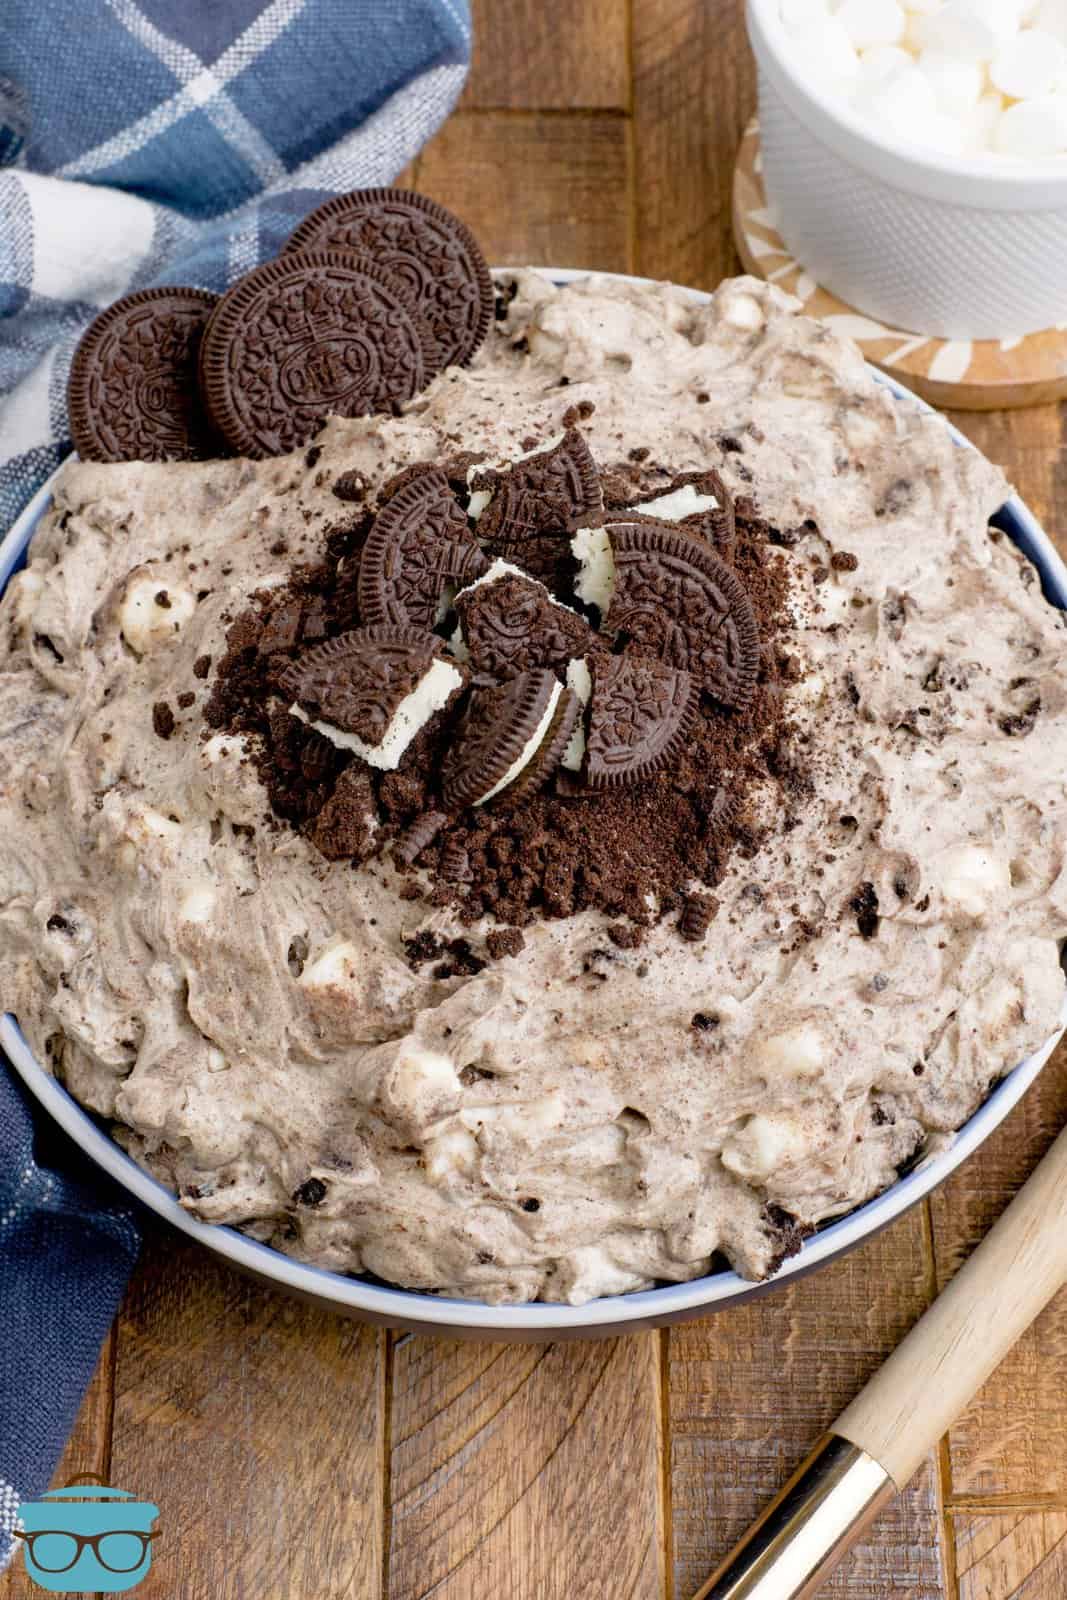 A bowl of Oreo fluff with chocolate oreos on top.